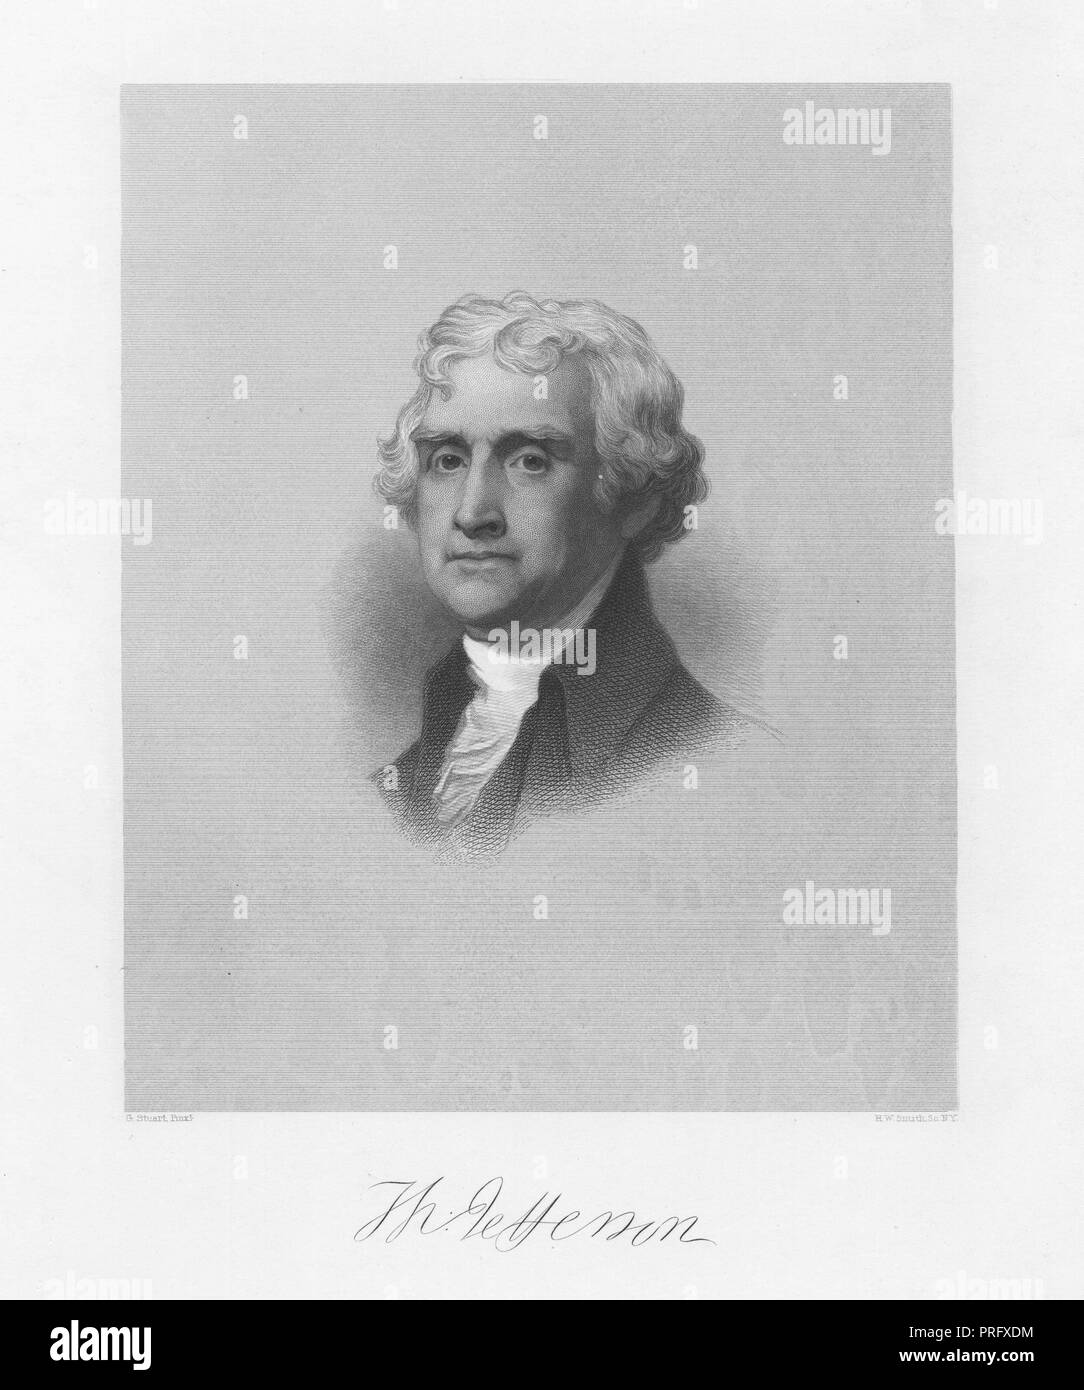 Engraved portrait of Thomas Jefferson, the third President of the United States and member of the Continental Congress, an American Founding Father from Shadwell, Virginia, 1837. From the New York Public Library. () Stock Photo